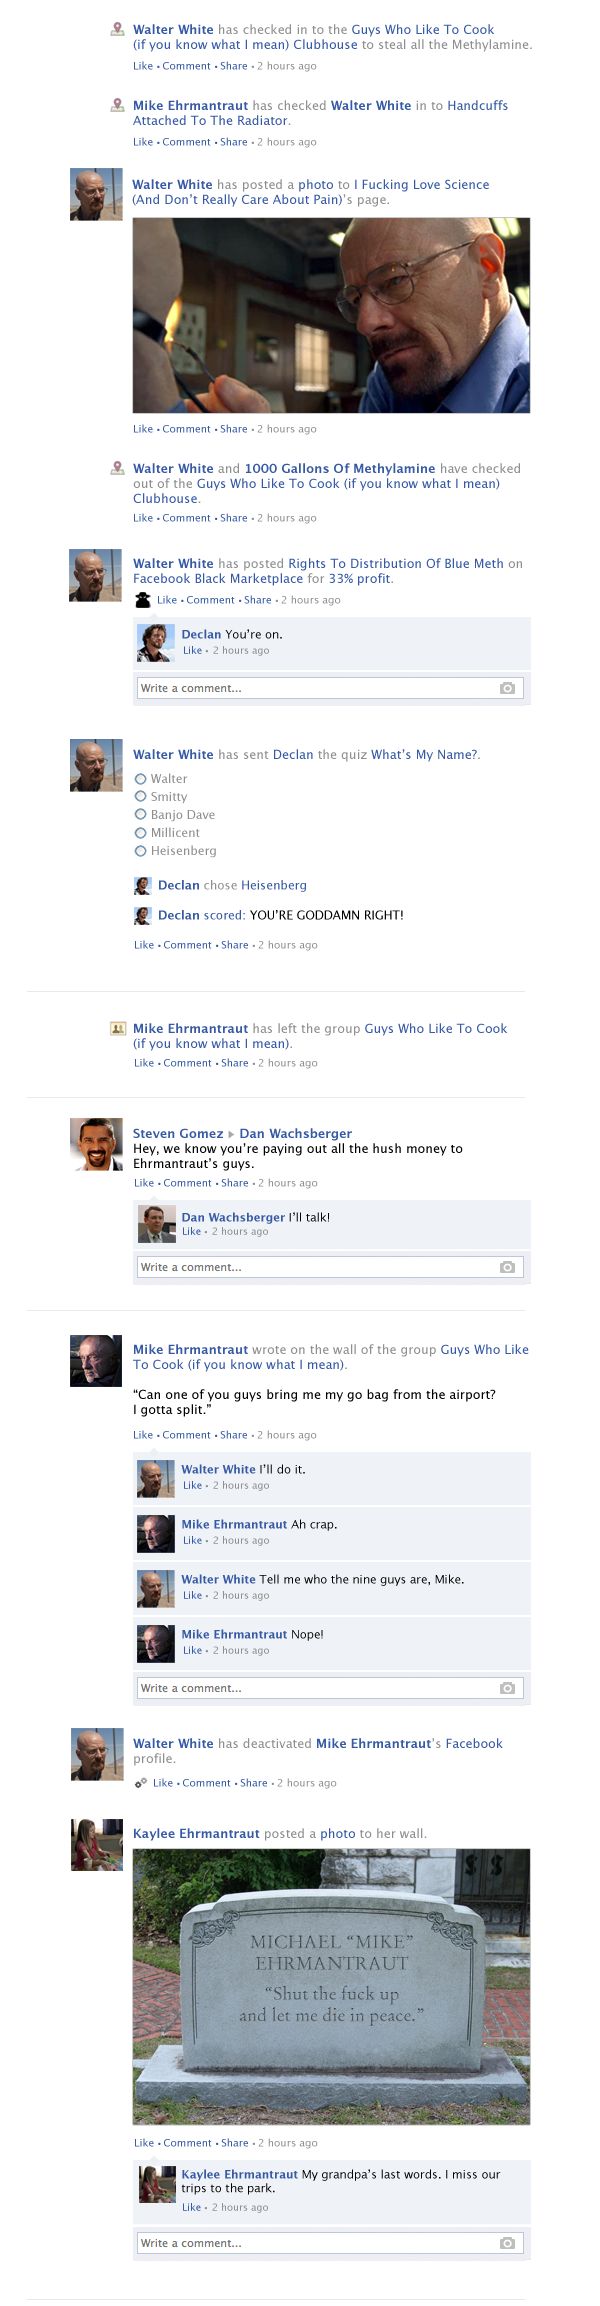 If Breaking Bad Took Place Entirely on Facebook